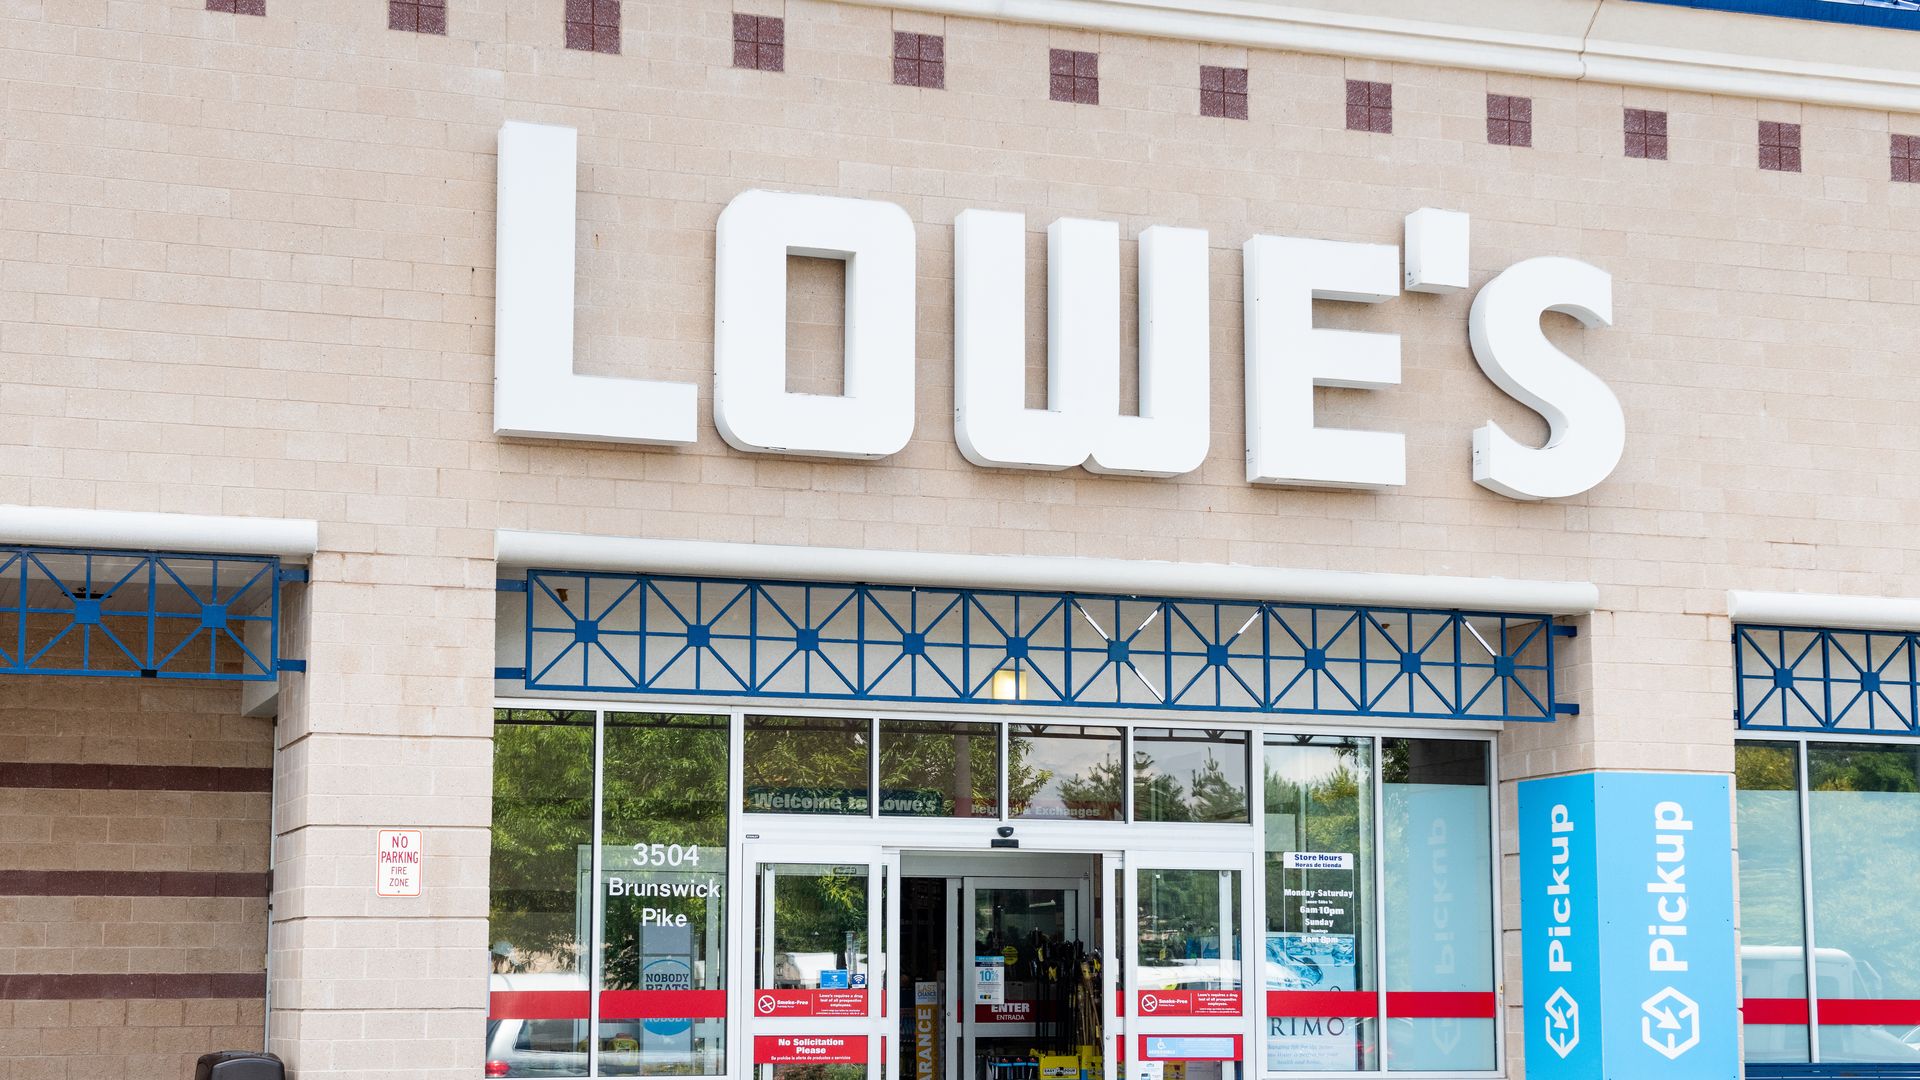 A Lowe's store